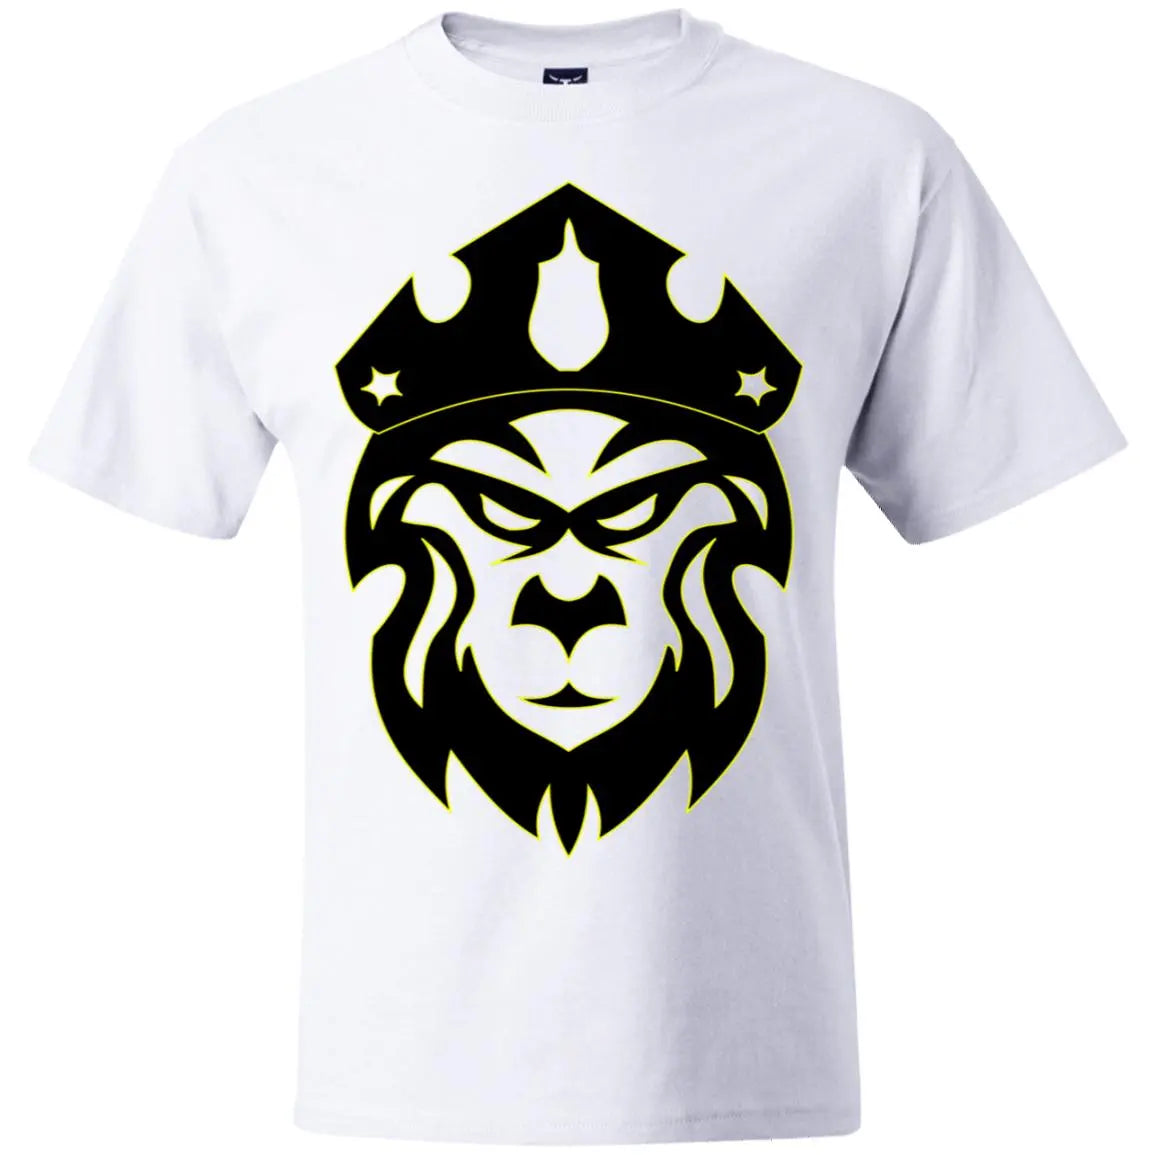 Multi - Crowned King - Men's Beefy Vintage T-Shirt Clothing – Multi Clothing Brand L L C®
multiclothingbrand.com/products/crown…
#clothingbrand #clothingline #clothingstore #clothingcompany #sustainable #affordable #premium #clothings #ethical #streetclothing #streetwear #multi #clothing #brand